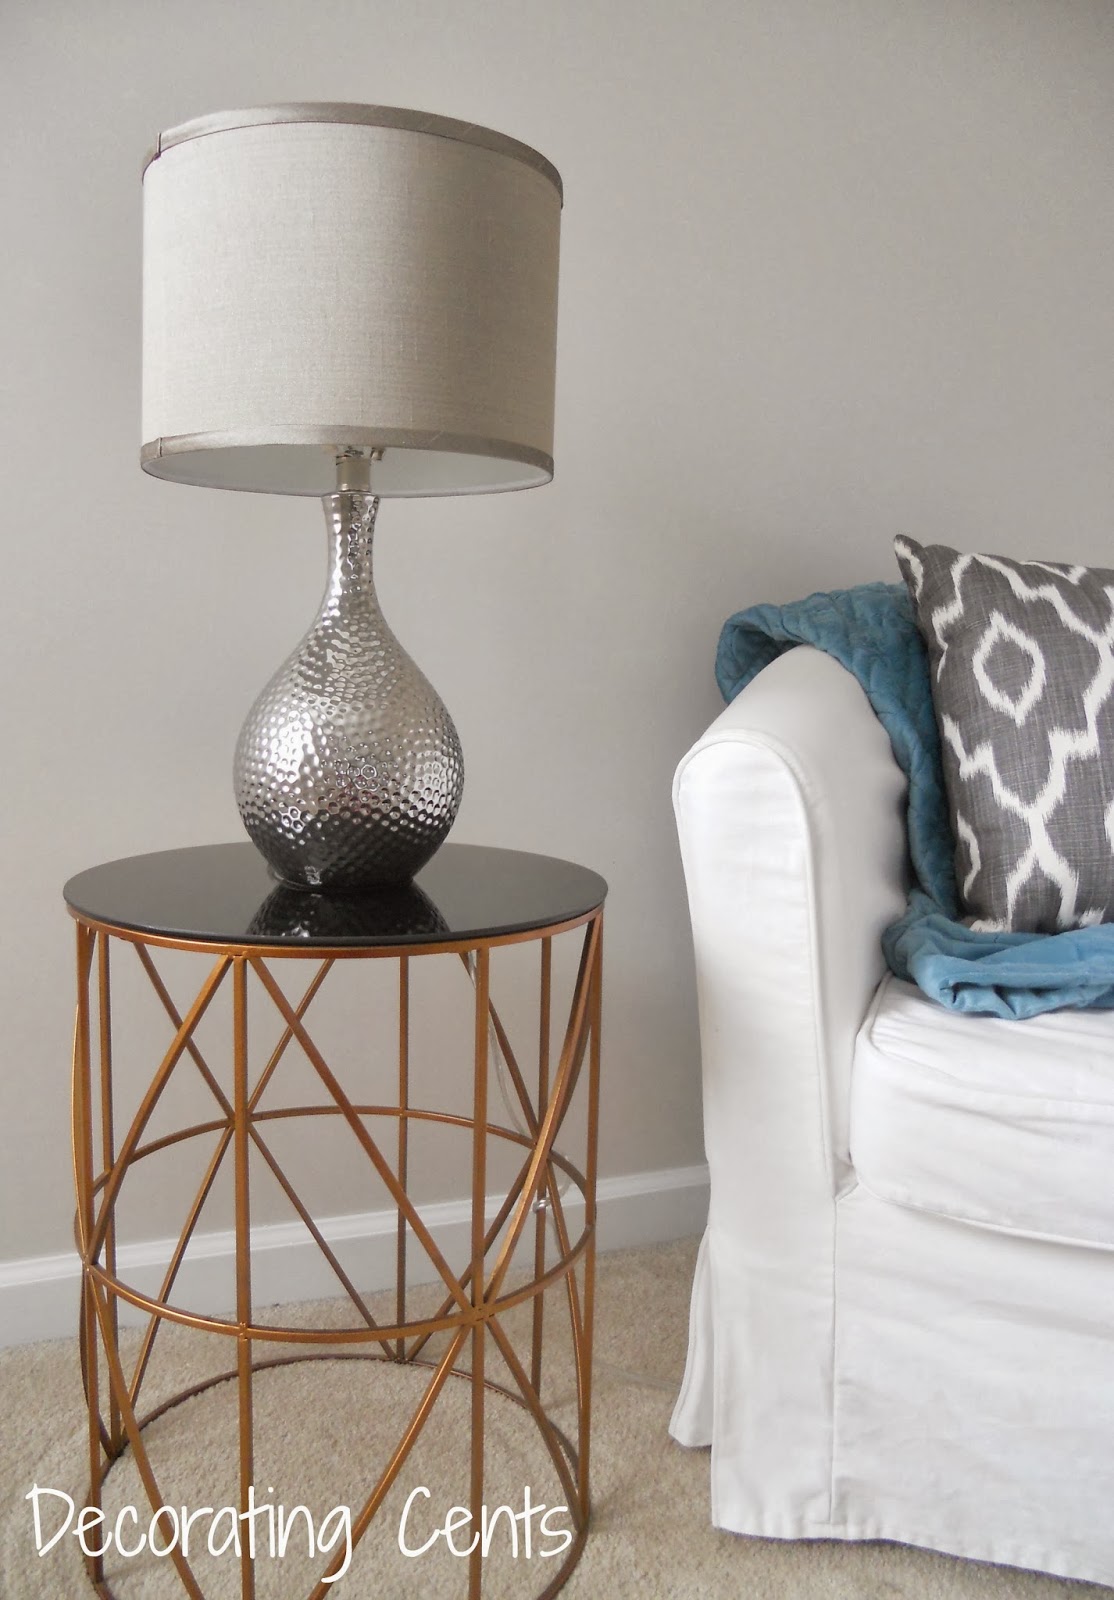 Decorating Cents: Bedroom Side Table Lamp